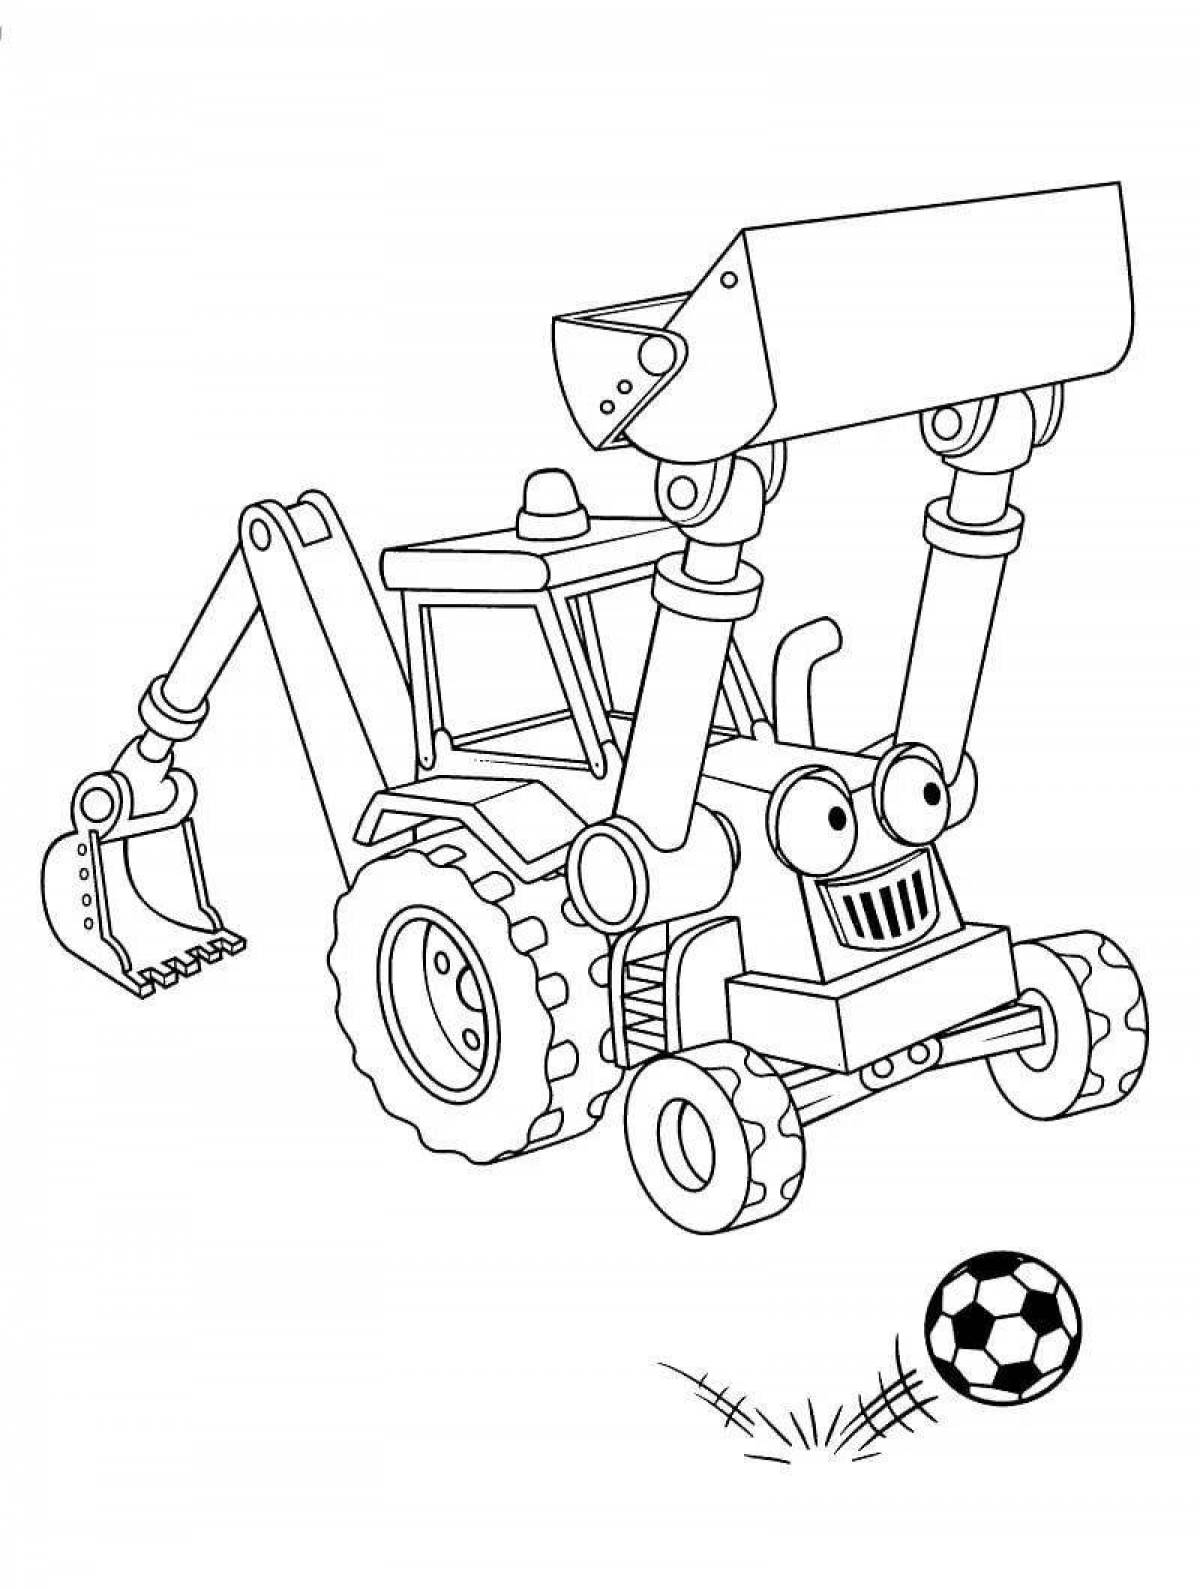 Friendly robot tractor coloring page